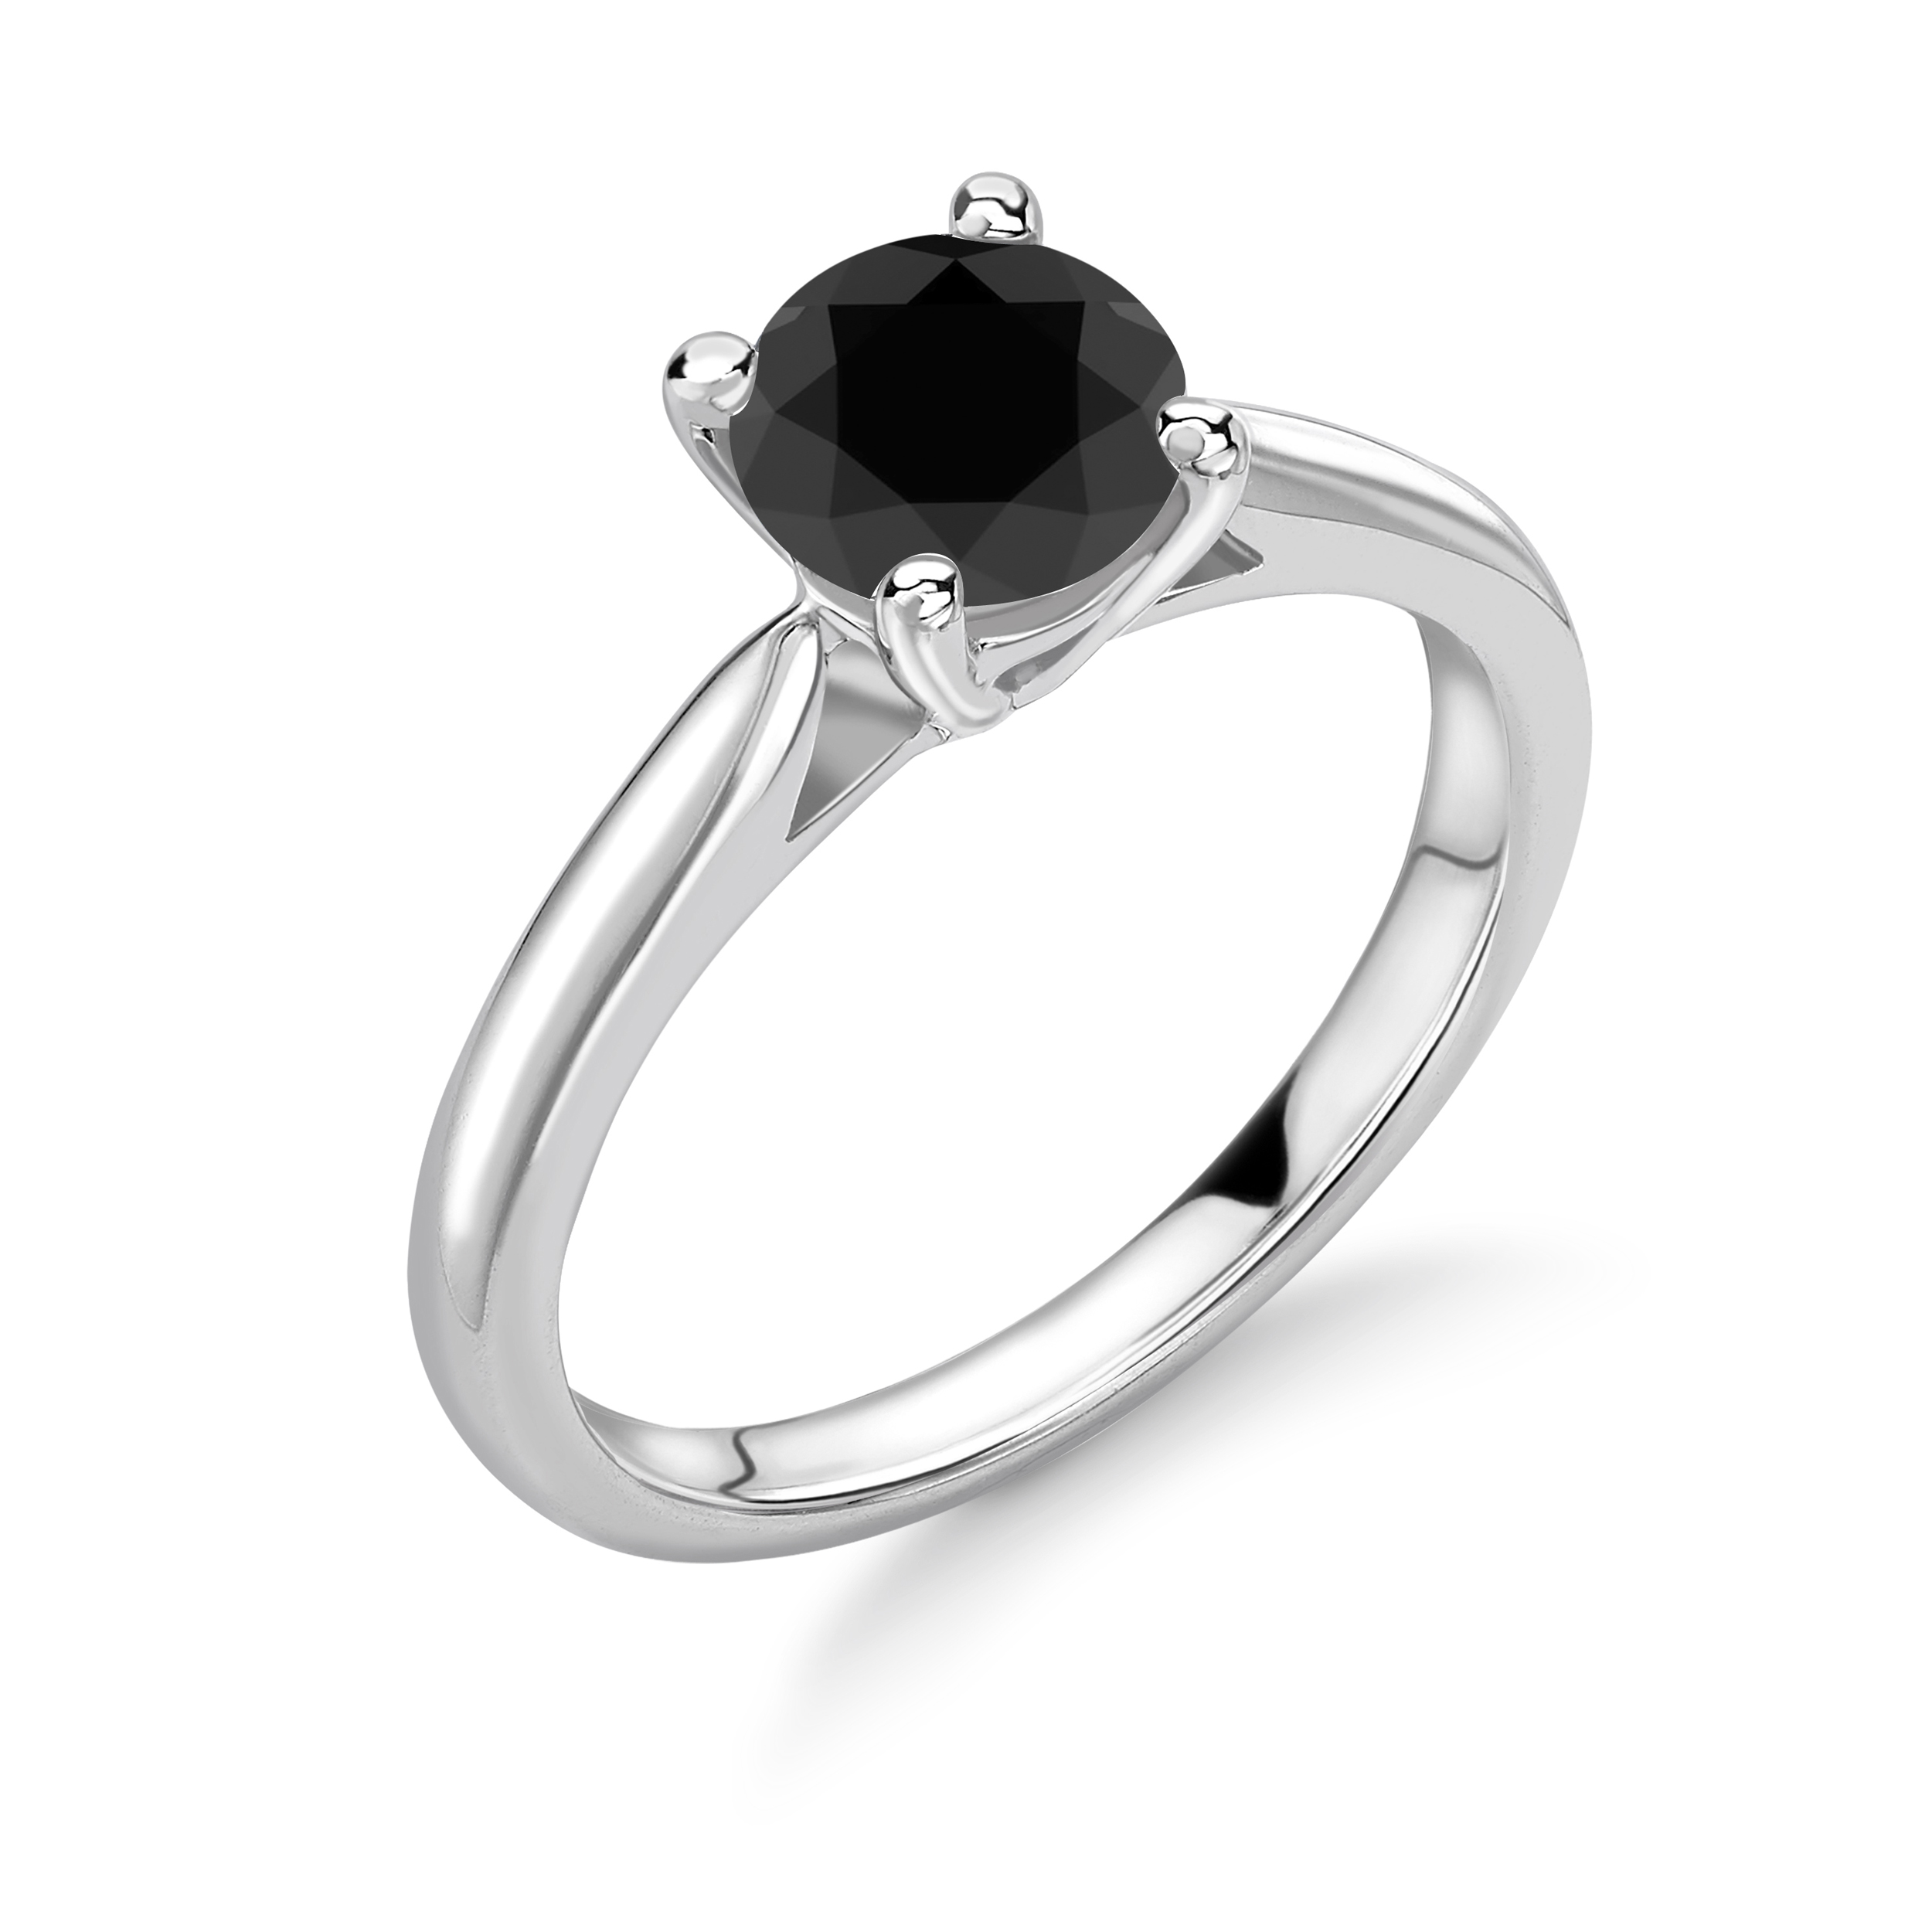 Classic Design 4 Prong Setting Round Solitaire Black Diamond Ring